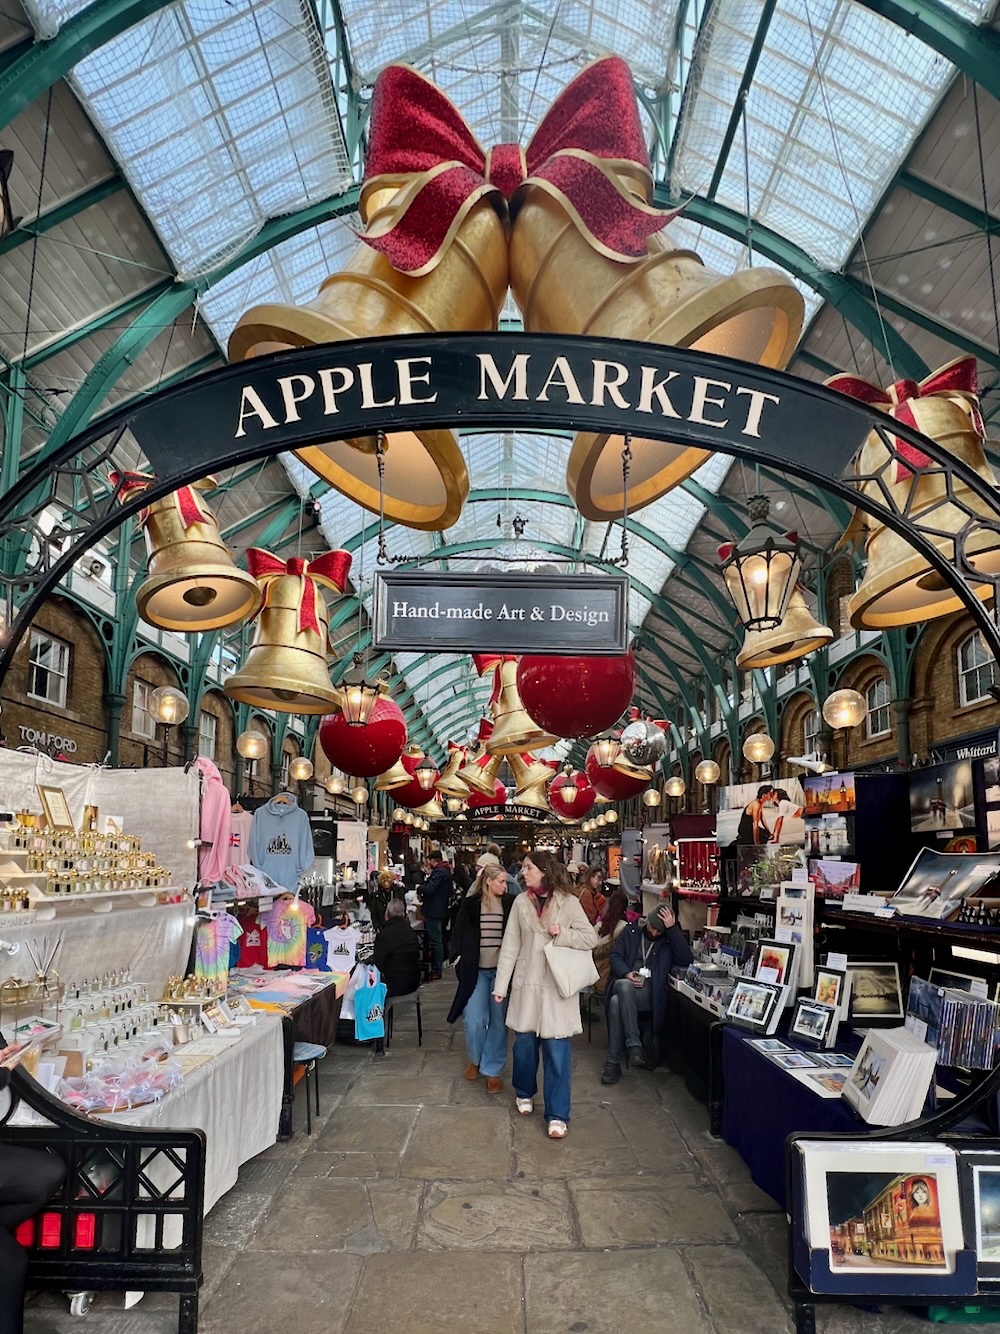 Apple Market at Covent Garden in London. Photo Credit: © Ursula Petula Barzey.